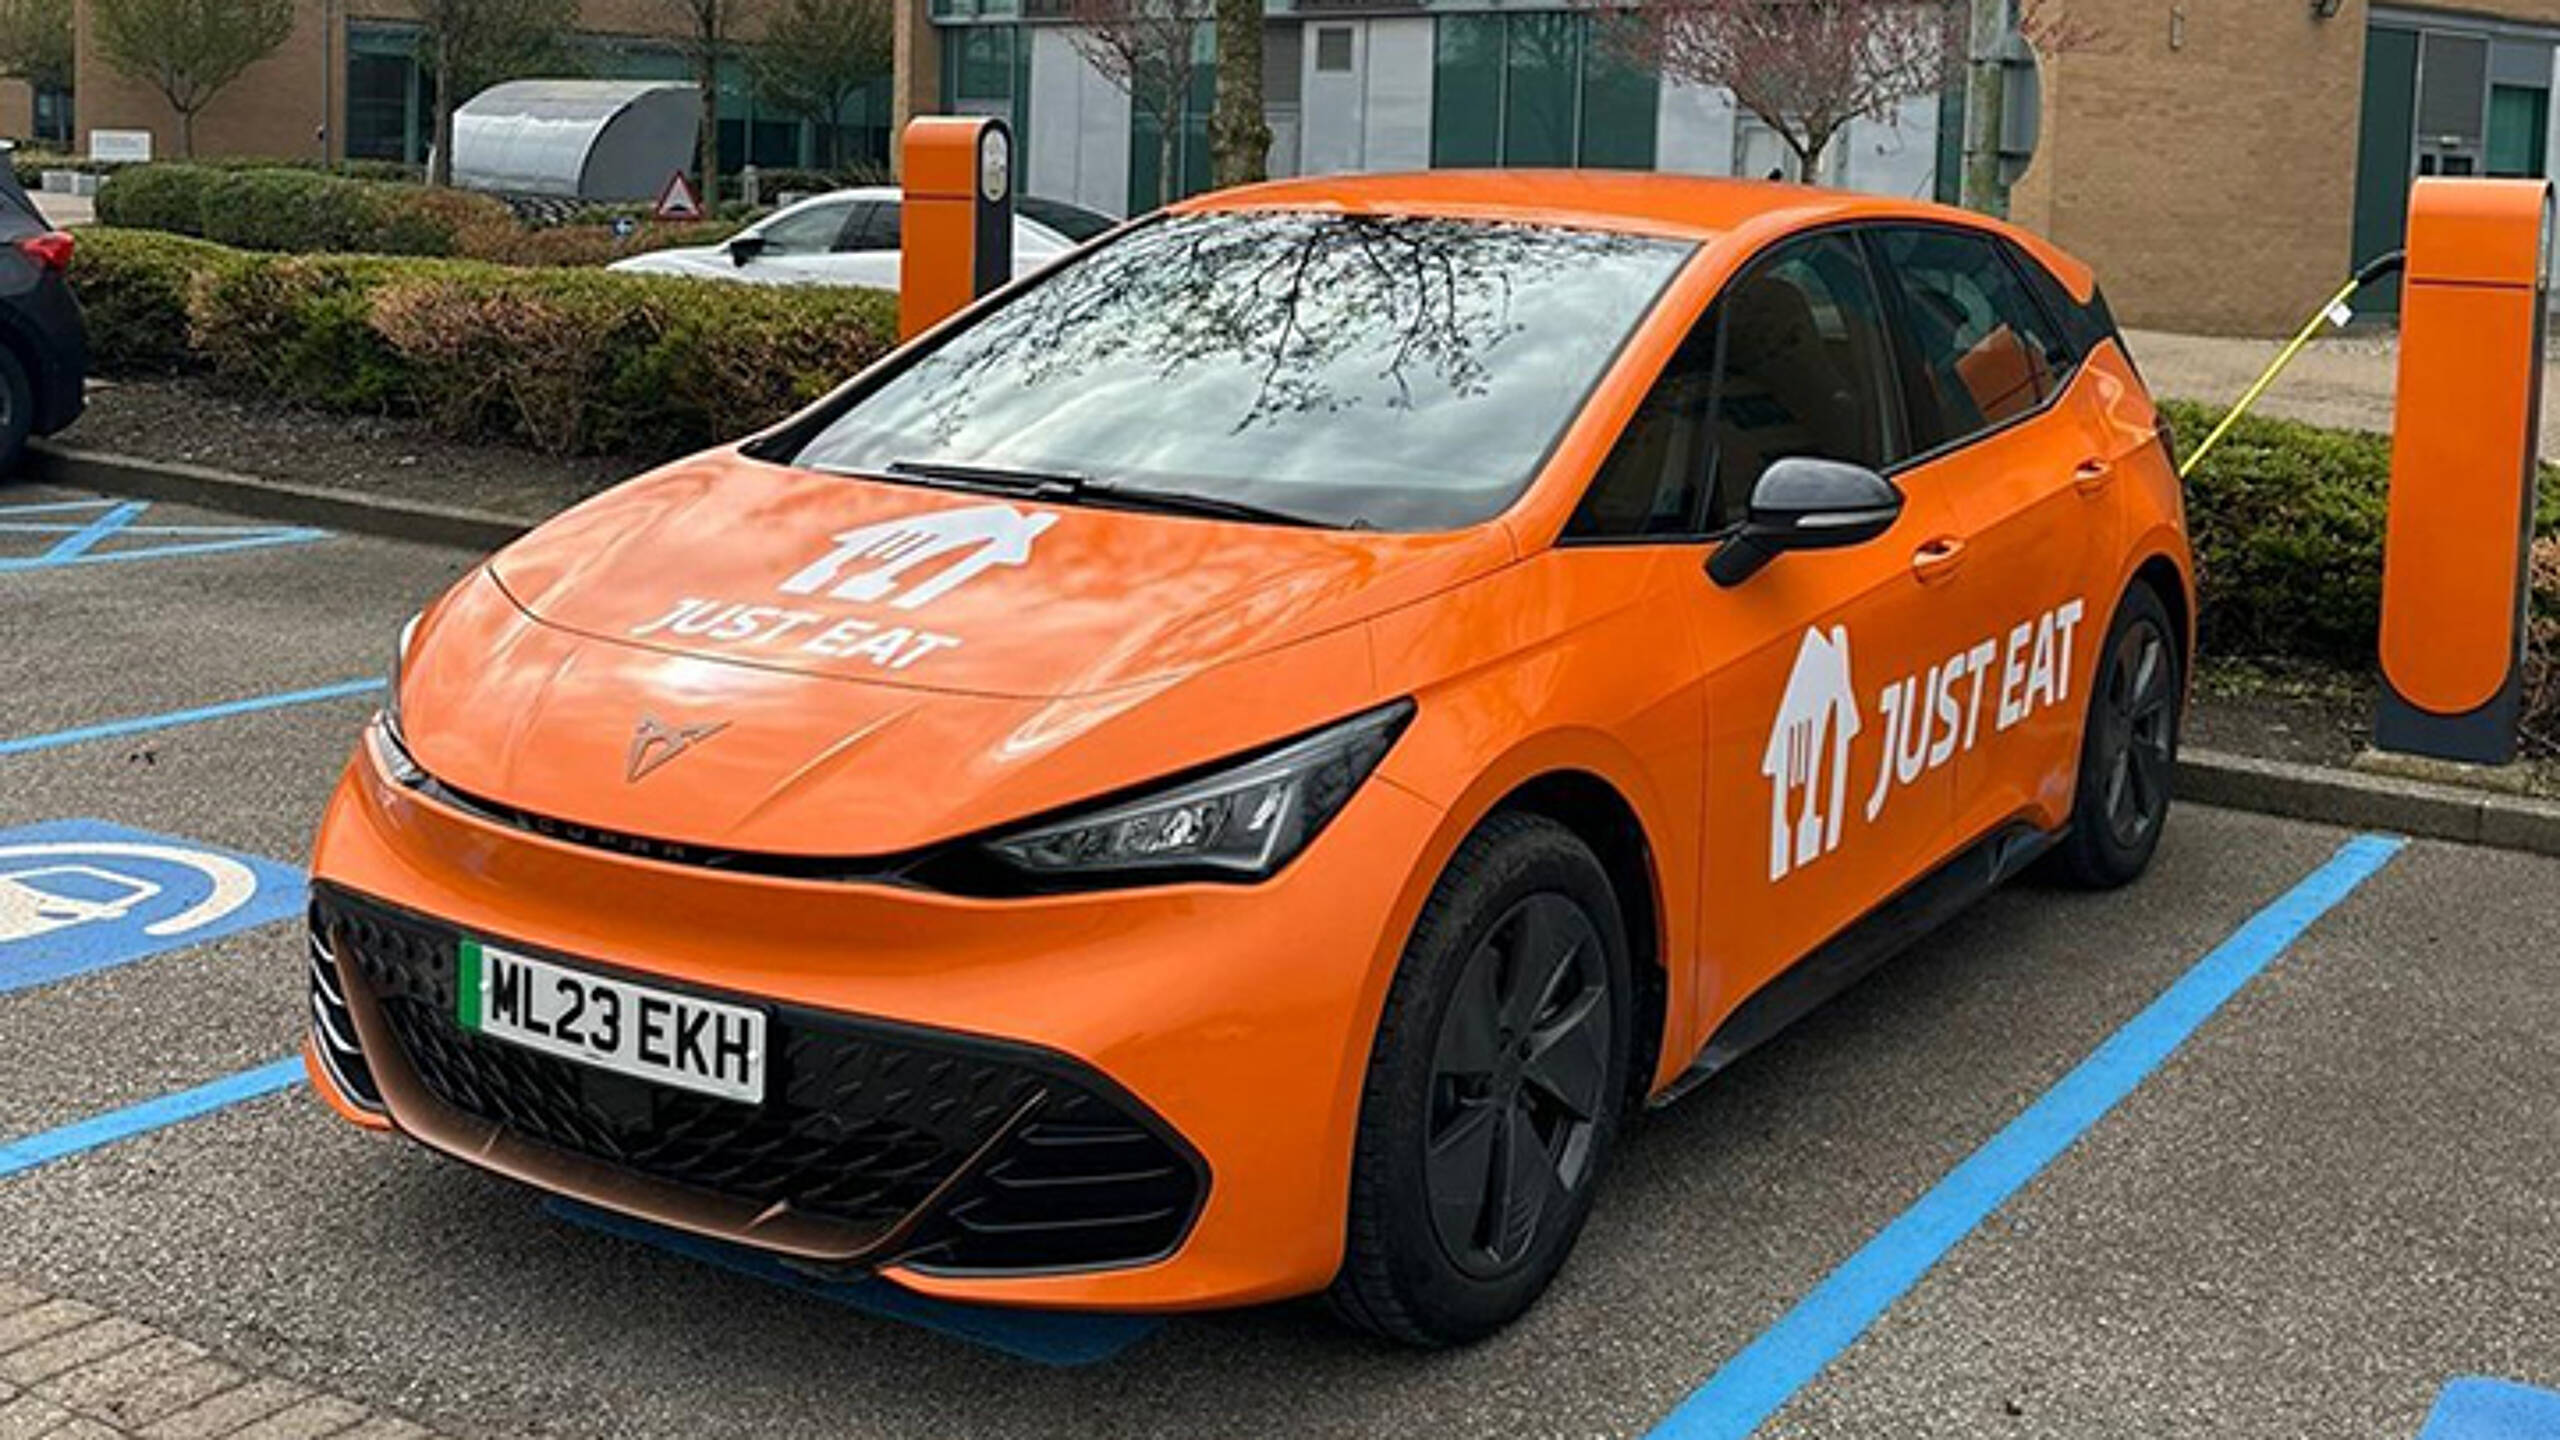 Just Eat to switch entire corporate sales fleet to electric vehicles by 2025